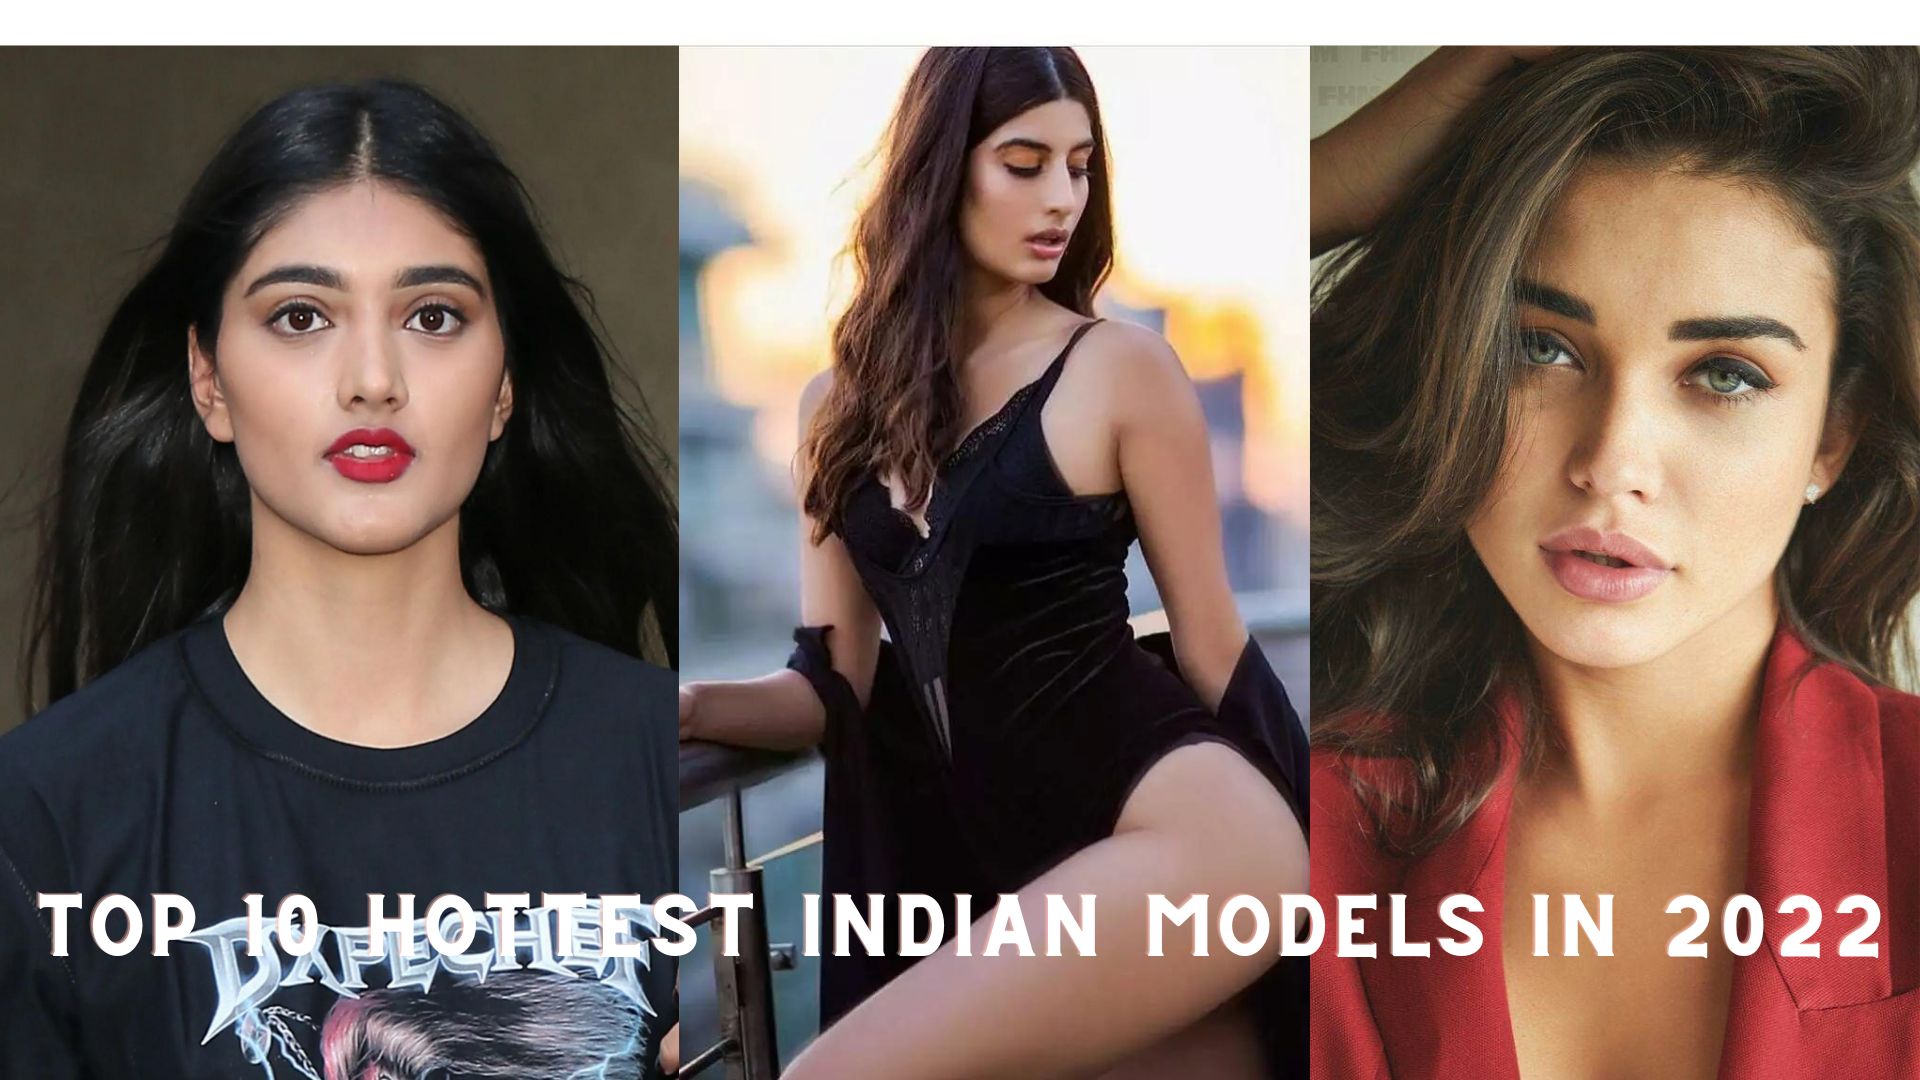 Top 10 Hottest Indian Models in 2022